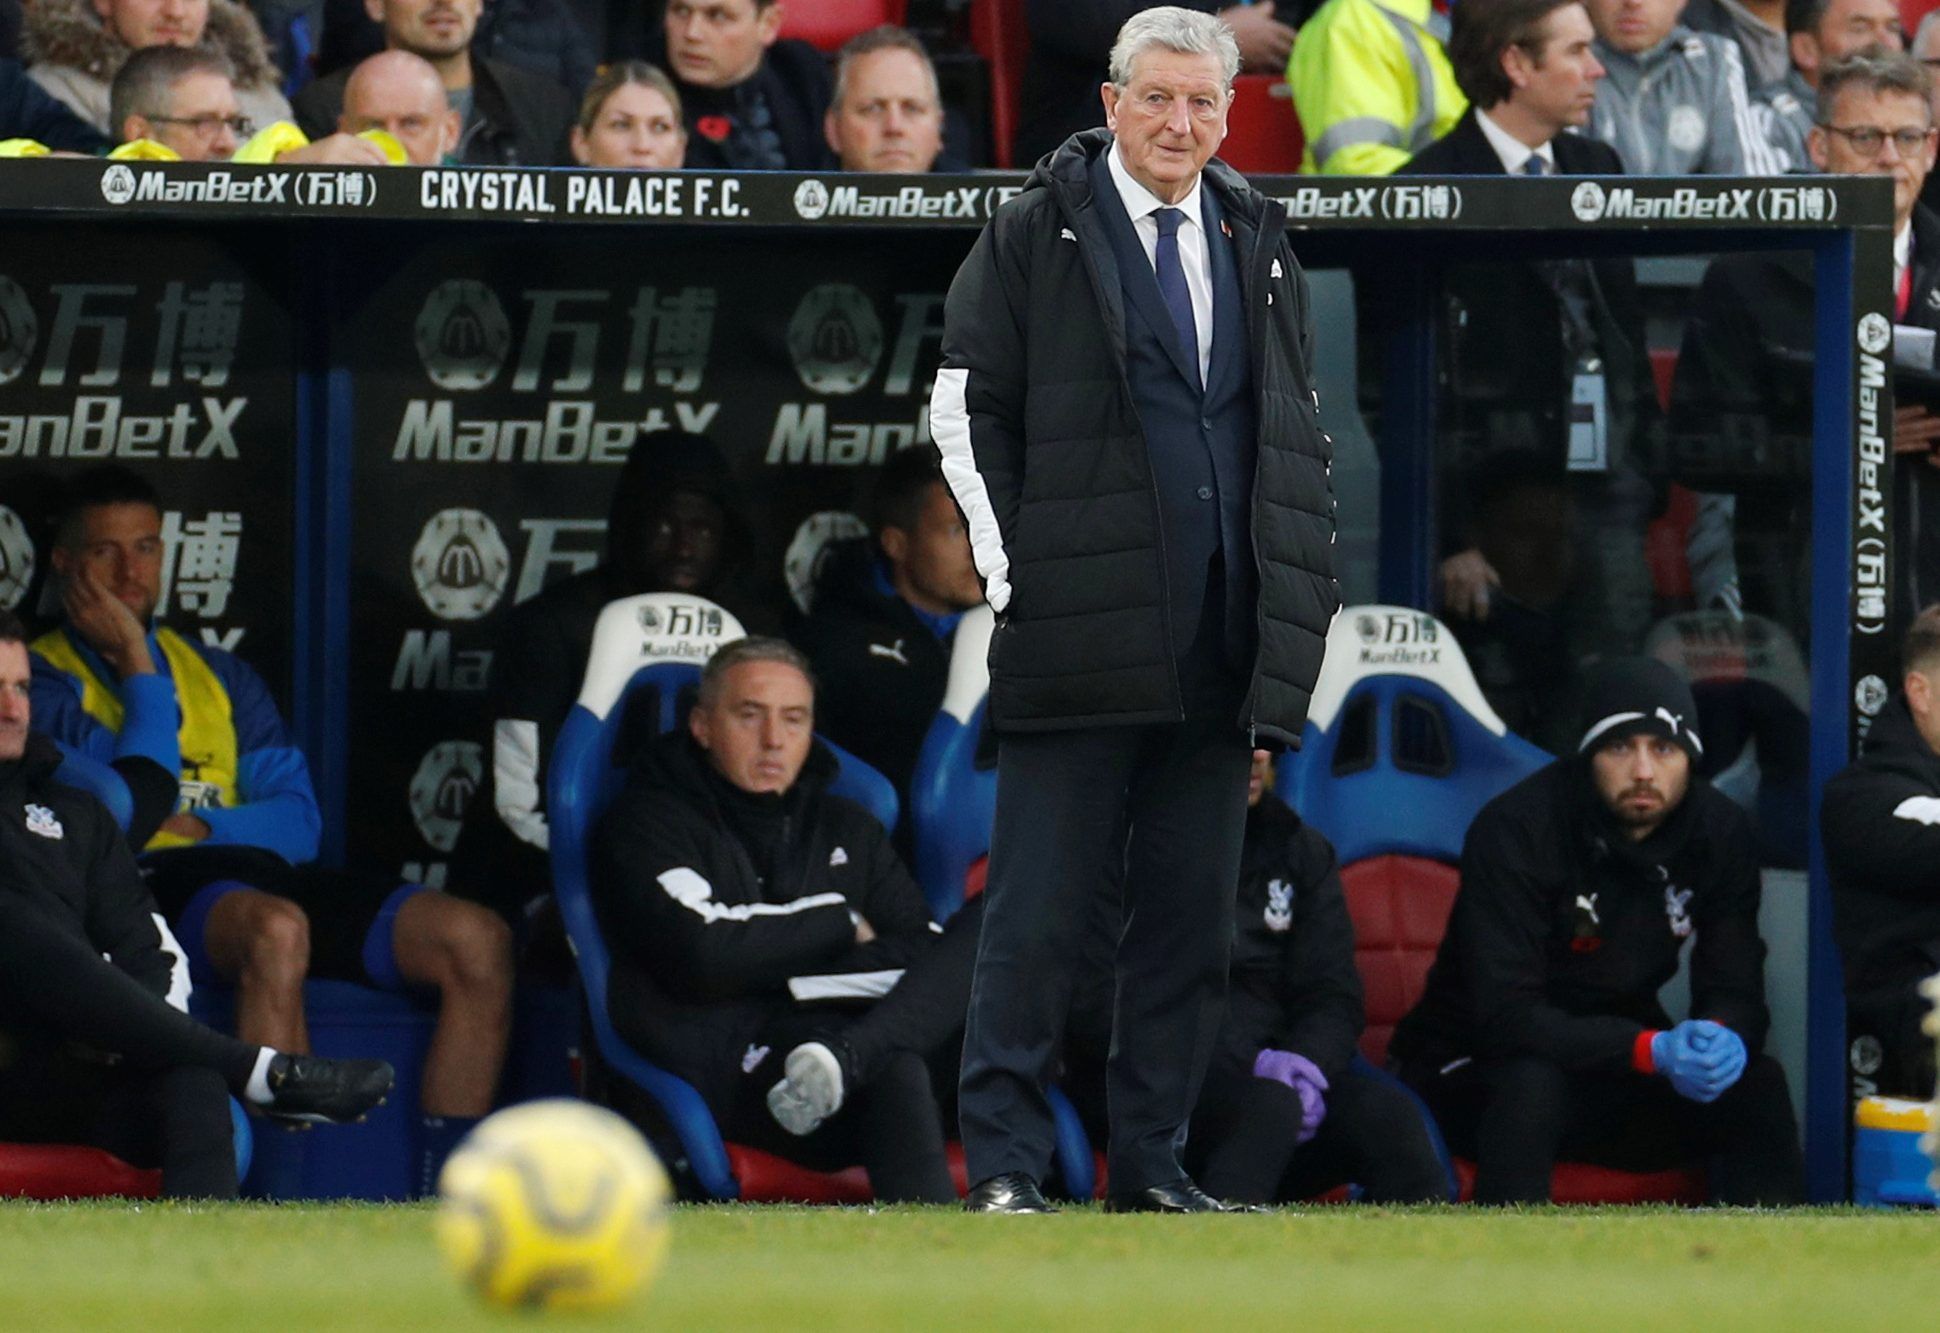 Soccer Football - Premier League - Crystal Palace v Leicester City - Selhurst Park, London, Britain - November 3, 2019  Crystal Palace manager Roy Hodgson looks on during the match   Action Images via Reuters/John Sibley  EDITORIAL USE ONLY. No use with unauthorized audio, video, data, fixture lists, club/league logos or 